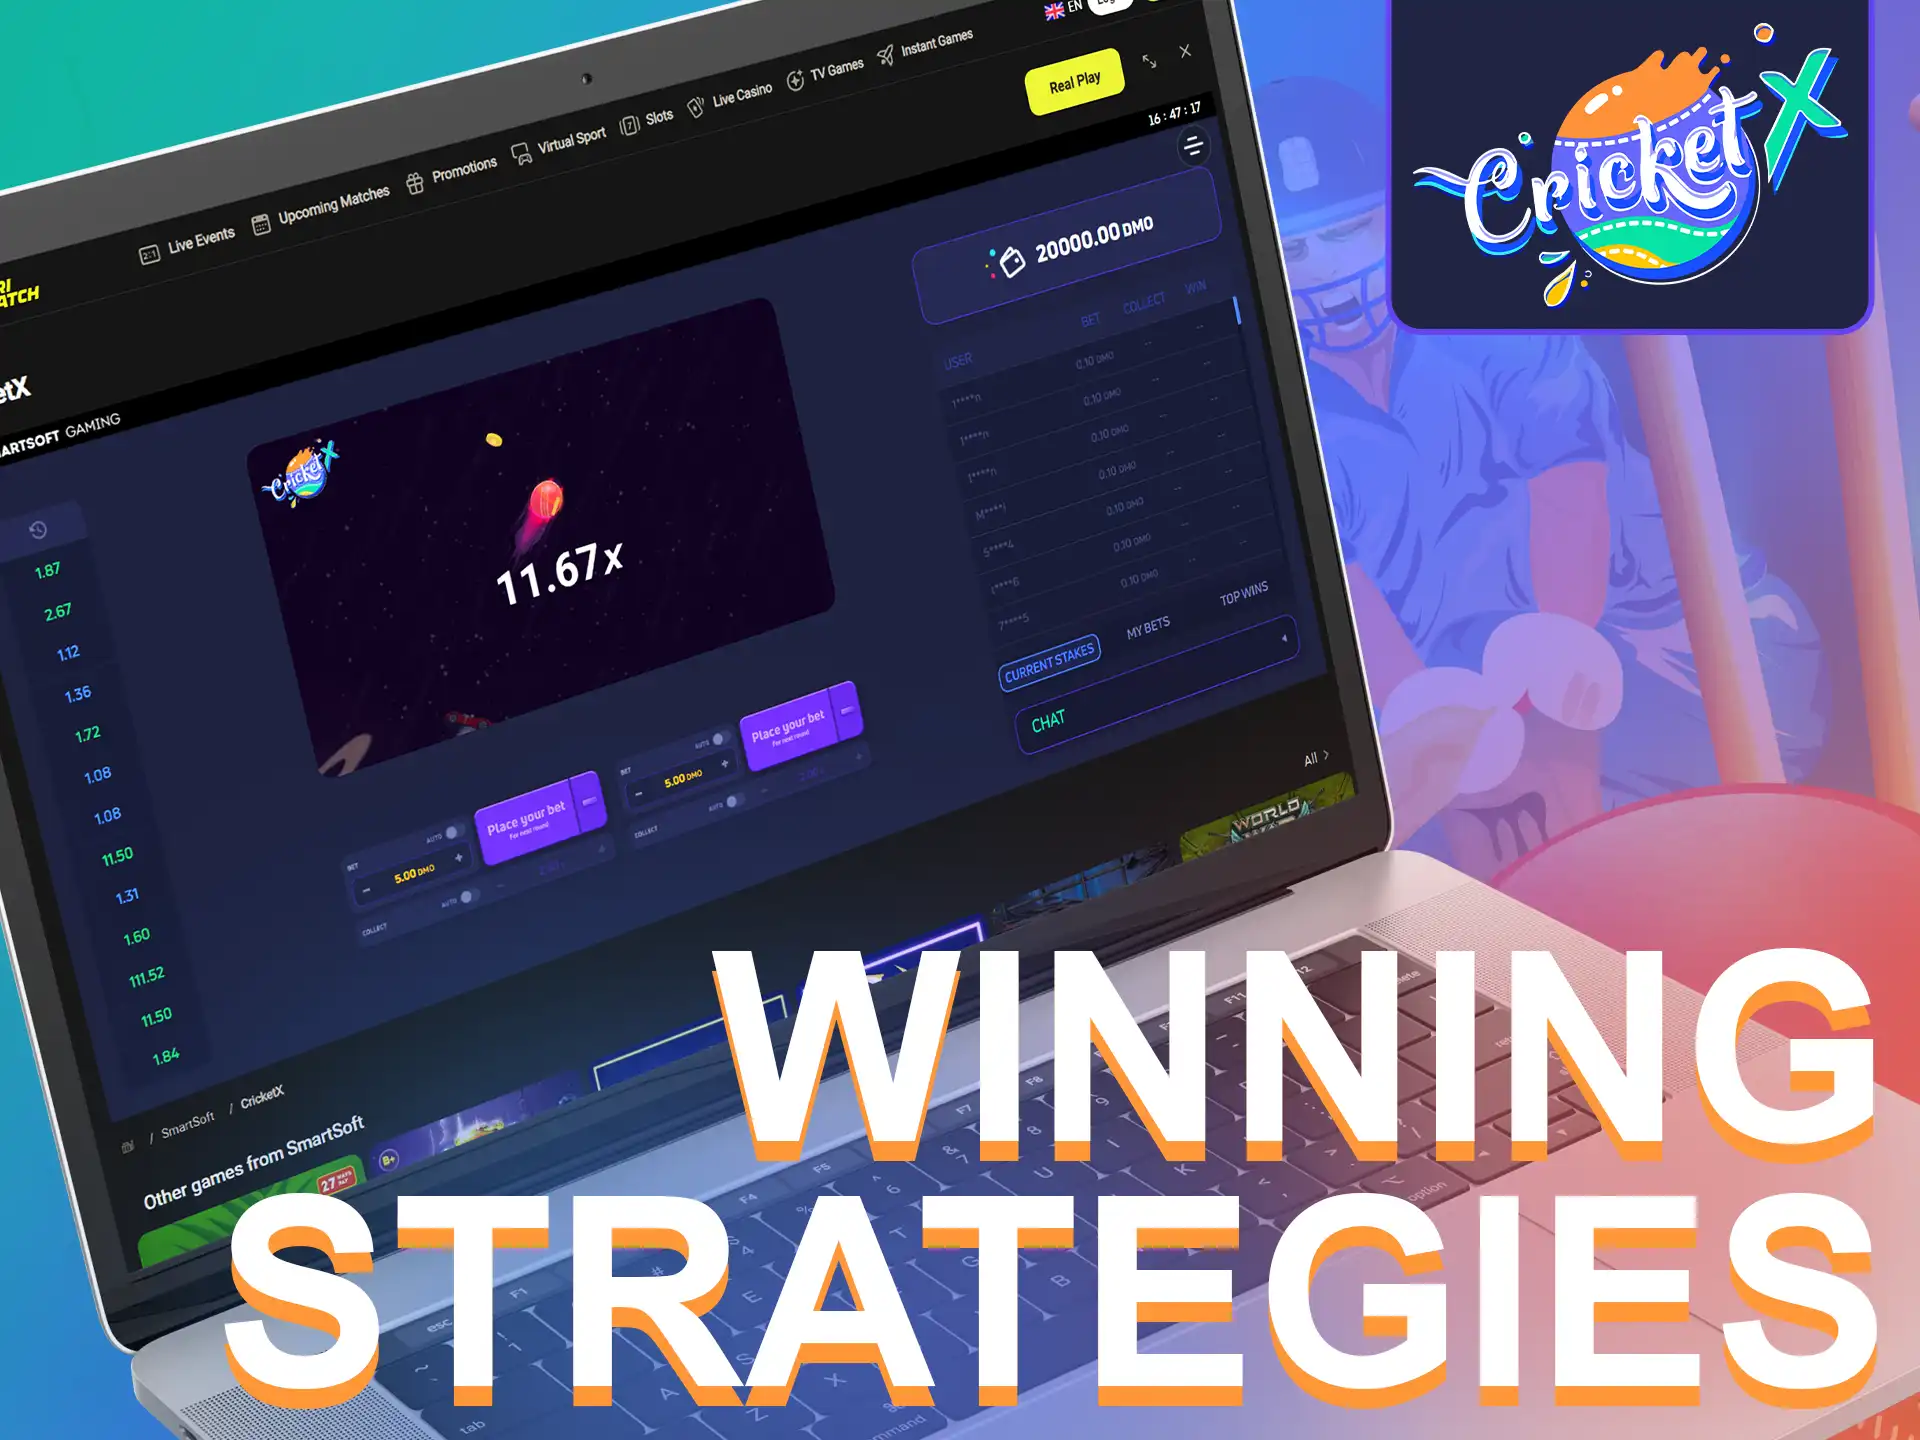 Stick to your betting strategy to win at Parimatch Cricket X.